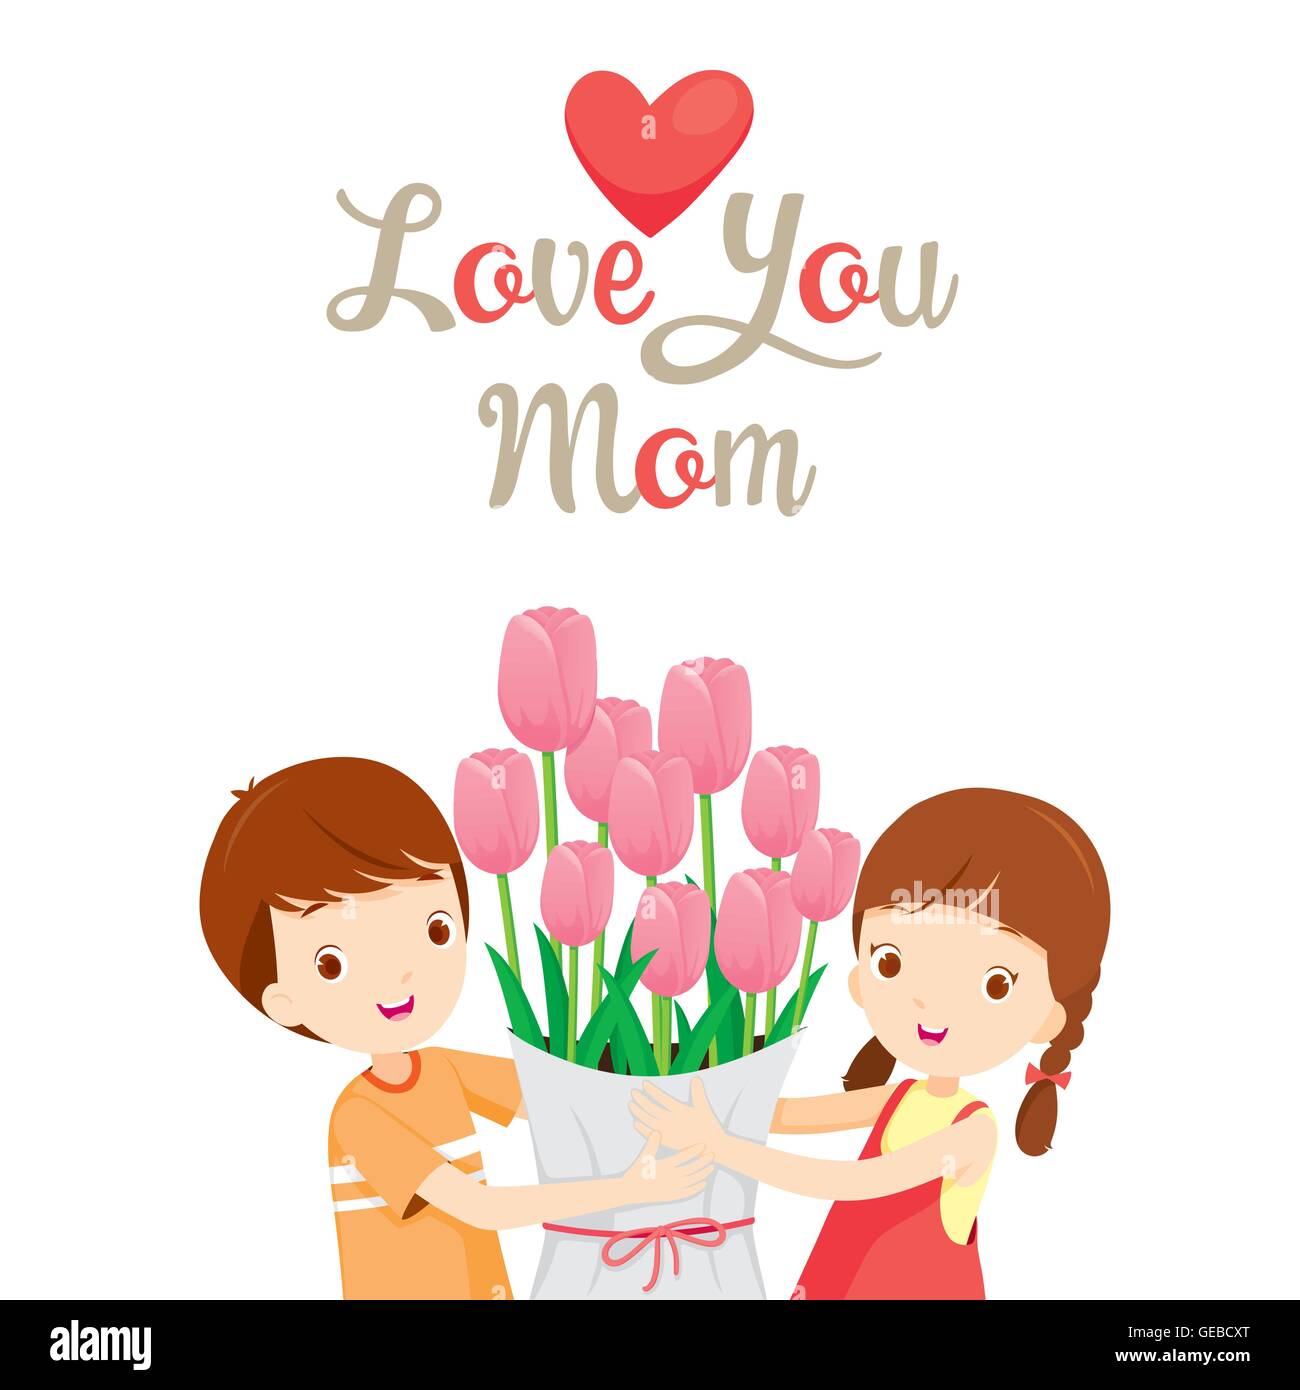 Love You Mom, Mothers Day, Giving, Tulip, Love, Baby Stock Vector ...